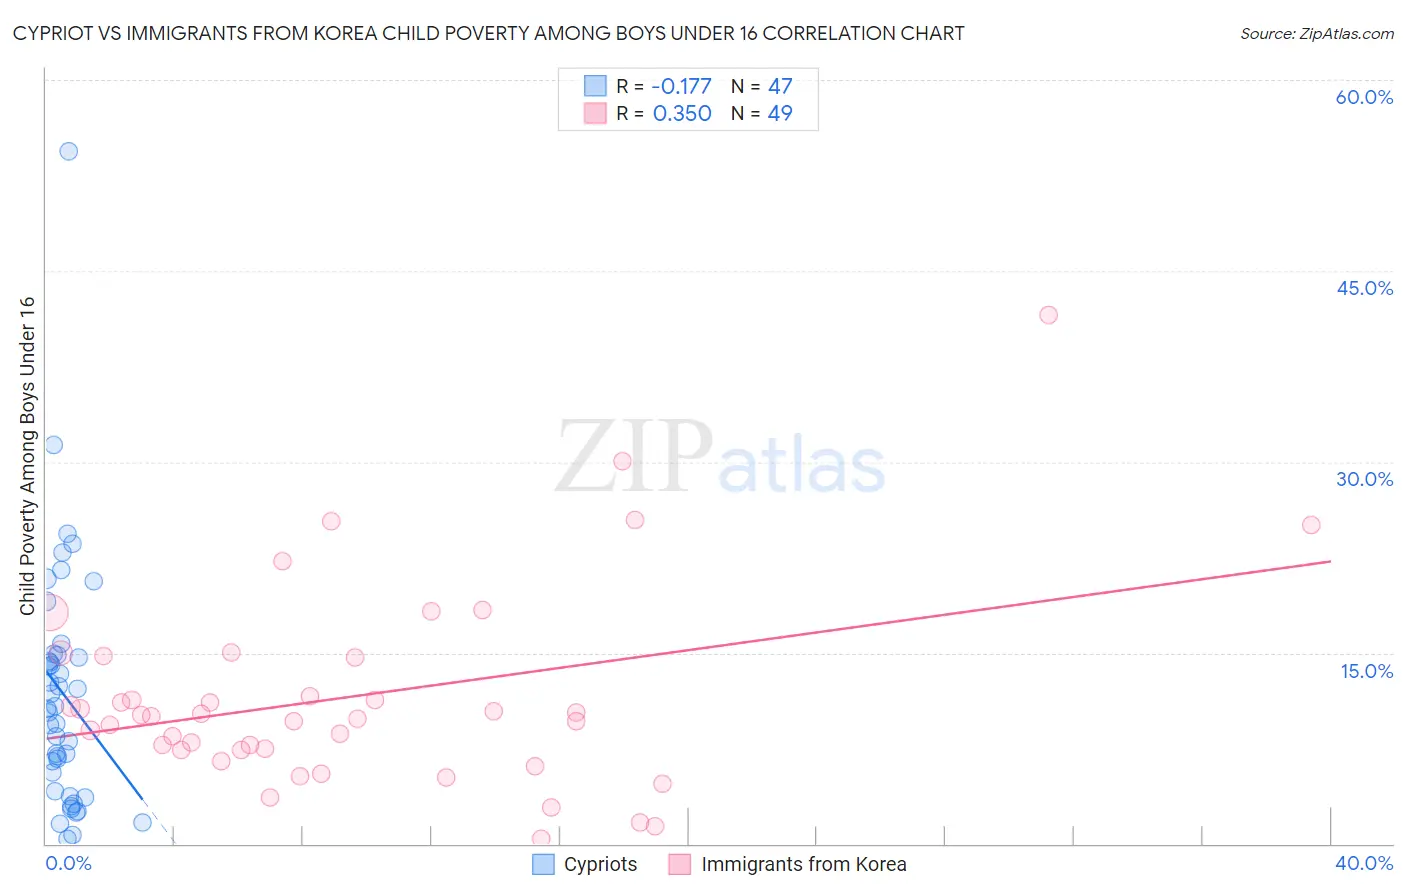 Cypriot vs Immigrants from Korea Child Poverty Among Boys Under 16